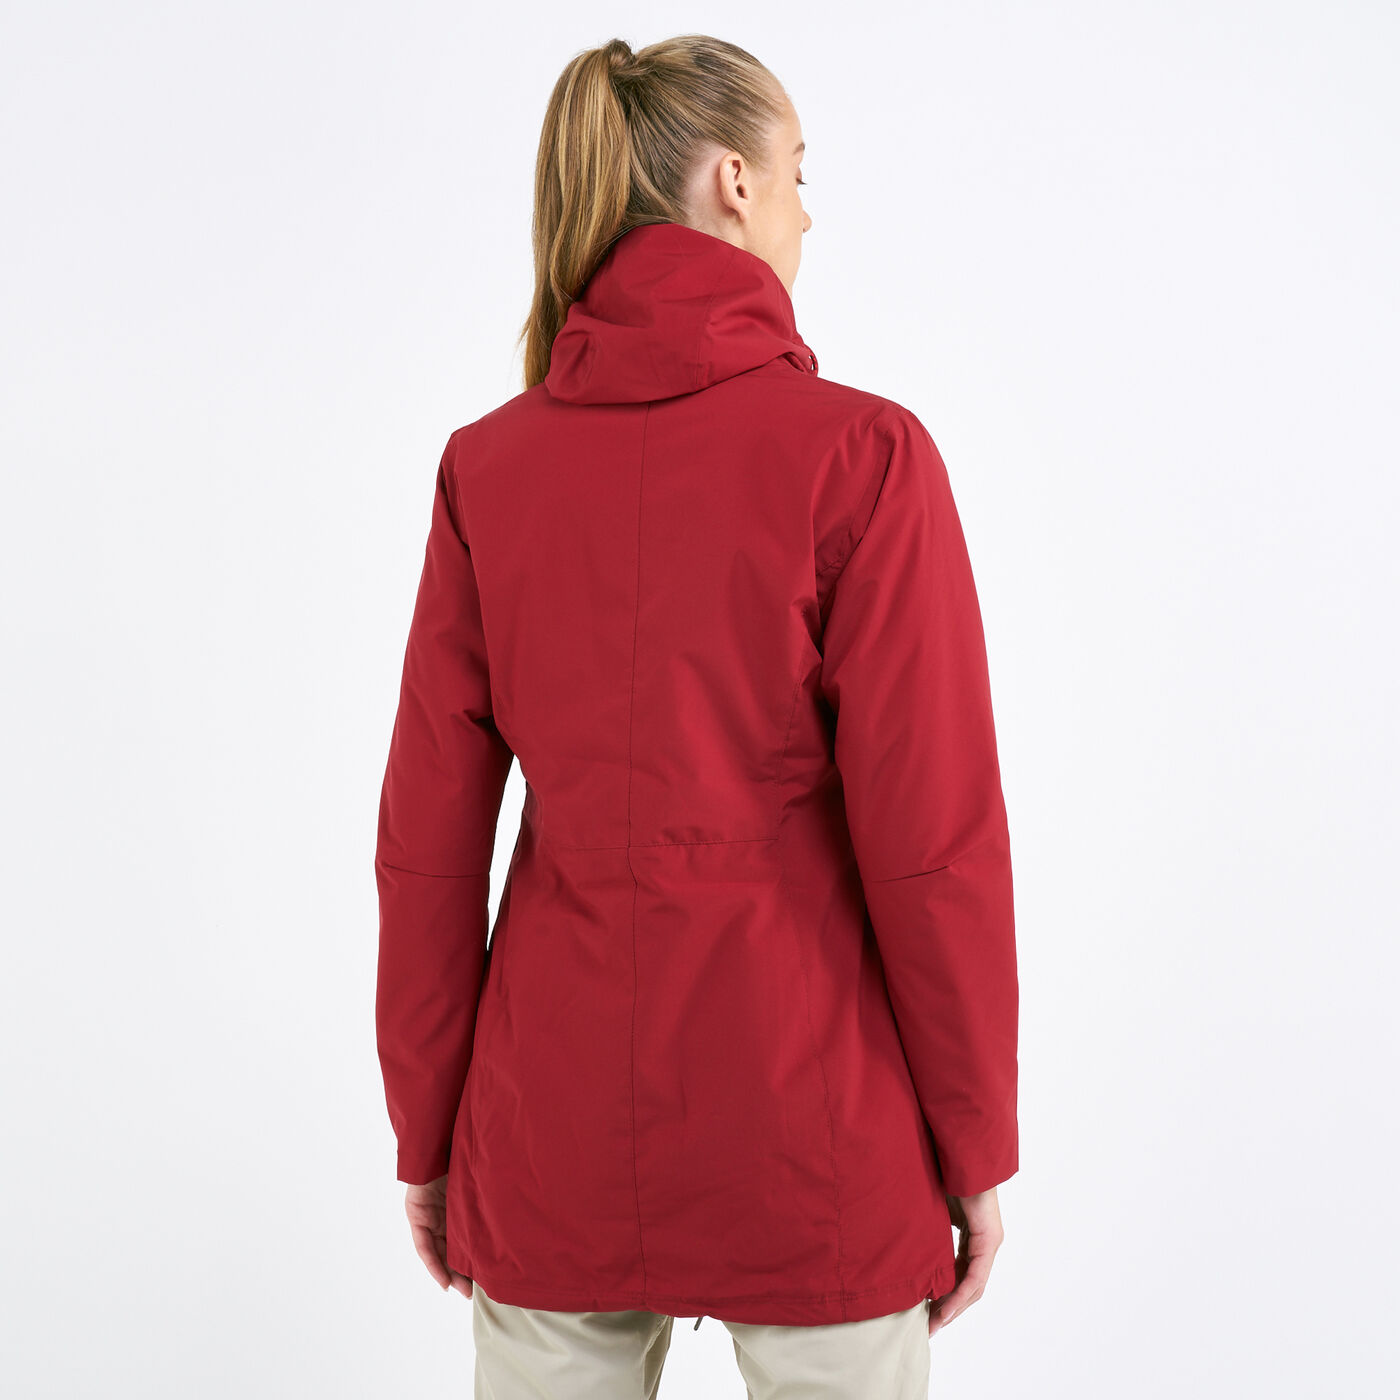 Women's Here and There™ Interchange Jacket